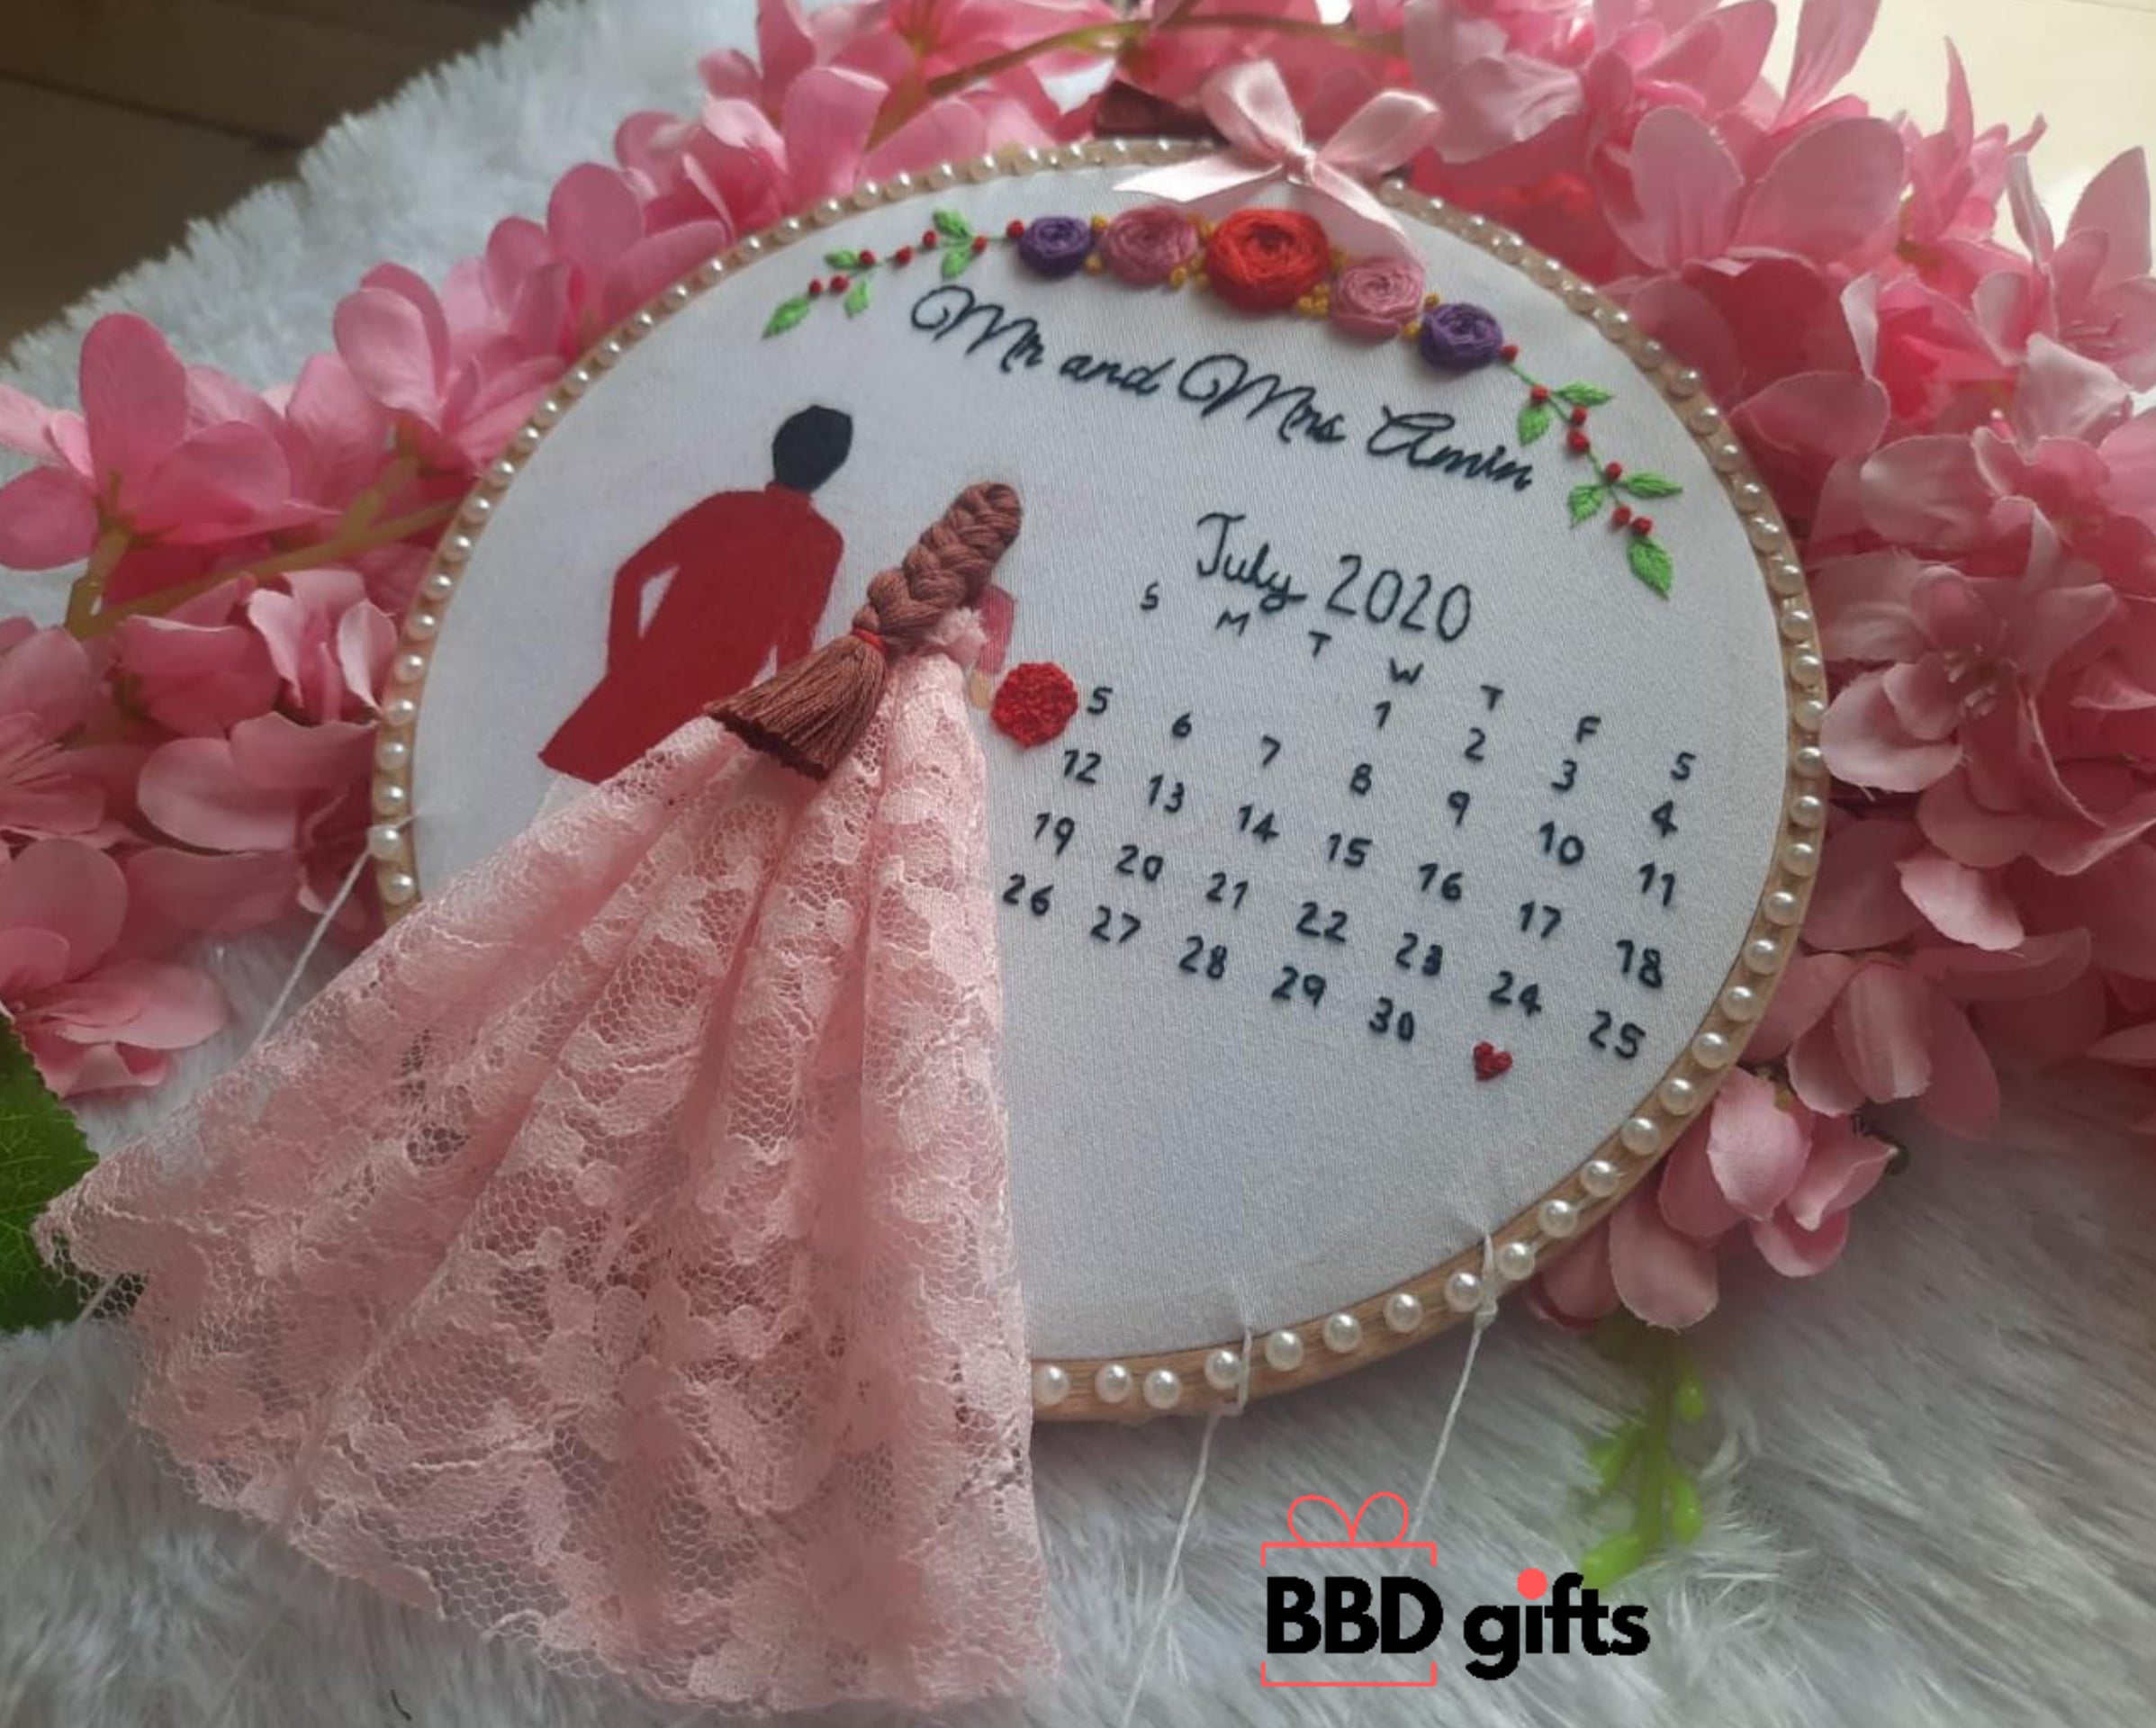 Personalized embroidery hoop